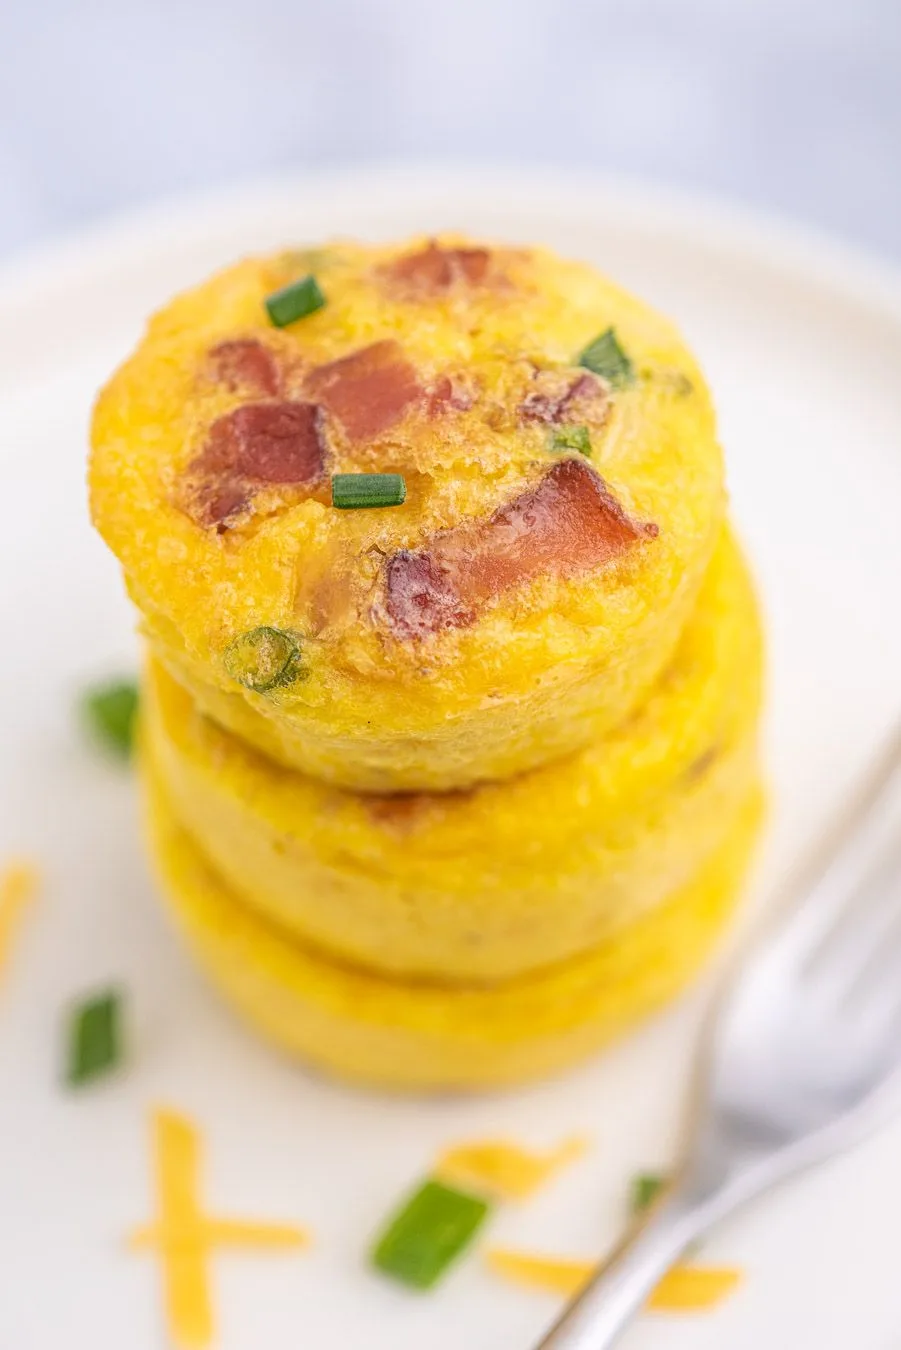 up close view of a stack of egg omelet cups that were made in a muffin tin. Bacon and chives as garnish.